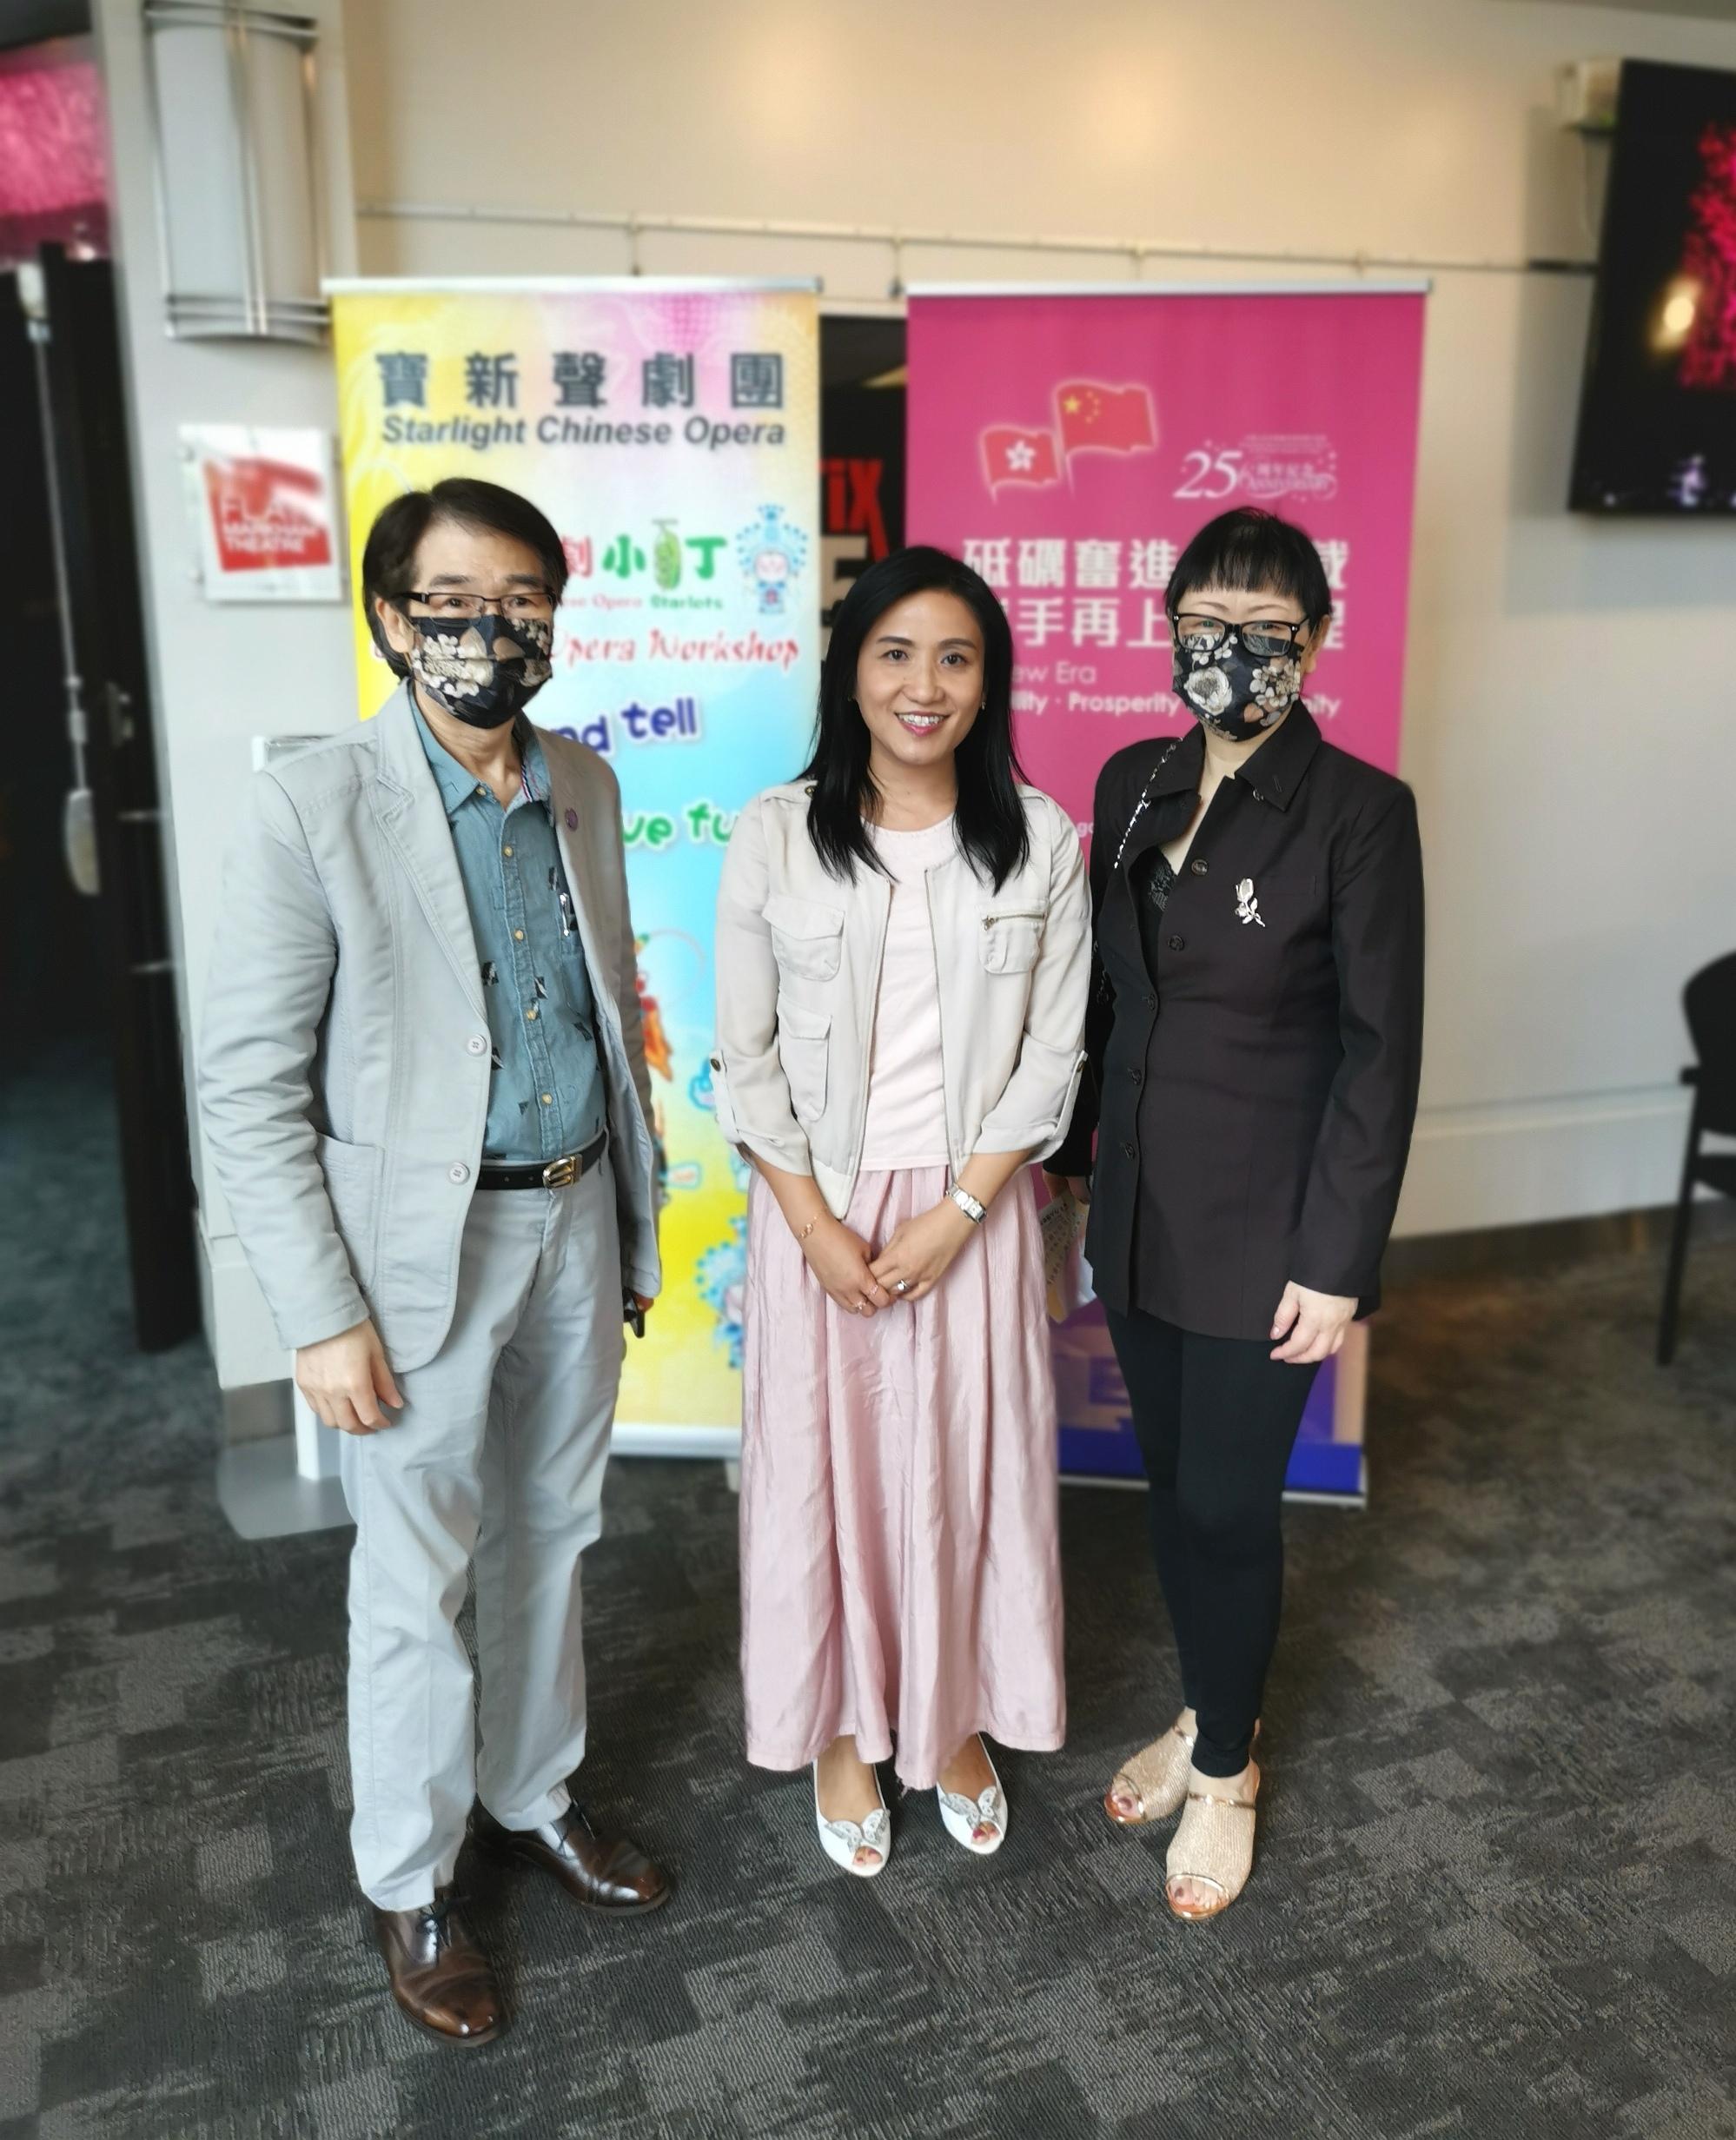 The Director of the Hong Kong Economic and Trade Office (Toronto), Ms Emily Mo (centre), is pictured with the President of Starlight Chinese Opera Performing Arts Centre, Ms Marianne Lui (right), and a guest before the start of the Cantonese opera performance at Flato Markham Theatre, Markham, Canada, on July 24 (Toronto time).